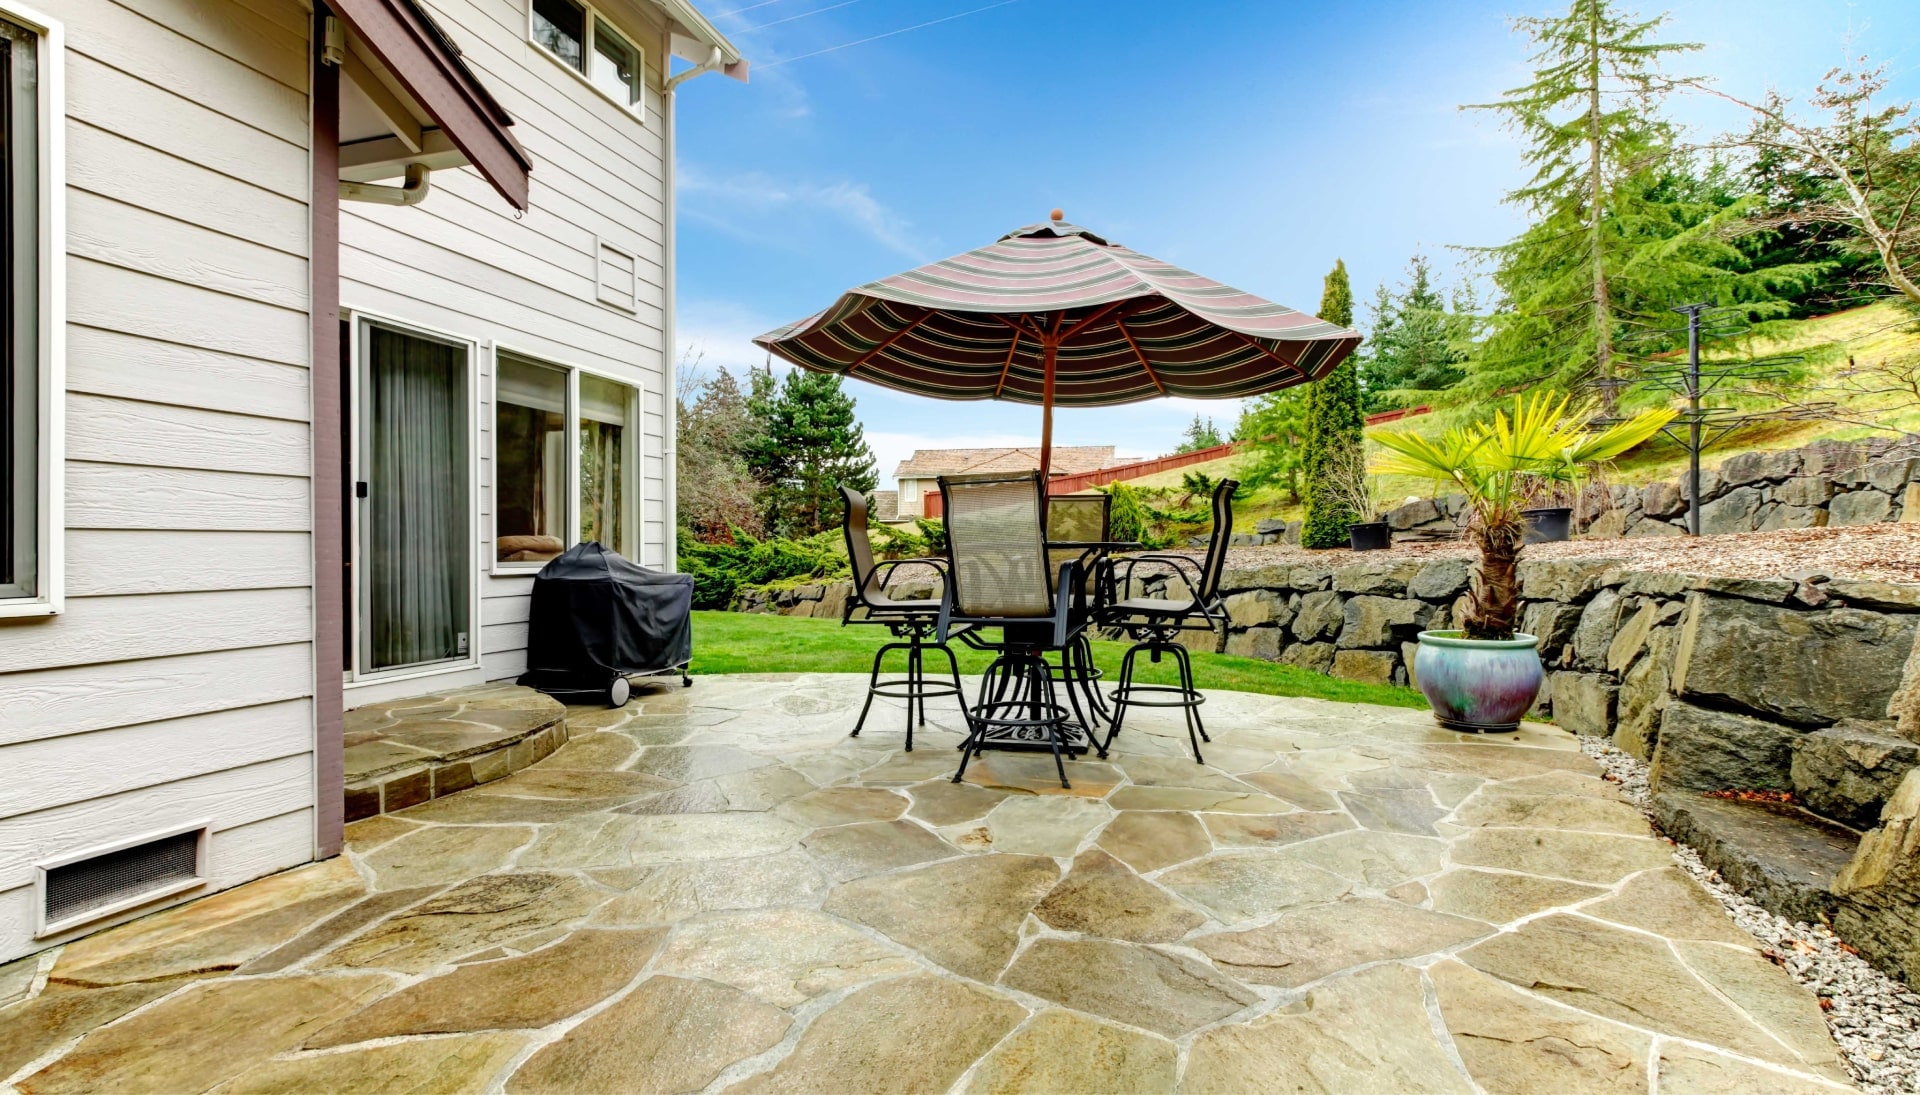 Create an Outdoor Oasis with Stunning Concrete Patio in Arlington, TX - Enjoy Beautifully Textured and Patterned Concrete Surfaces for Your Entertaining and Relaxation Needs.